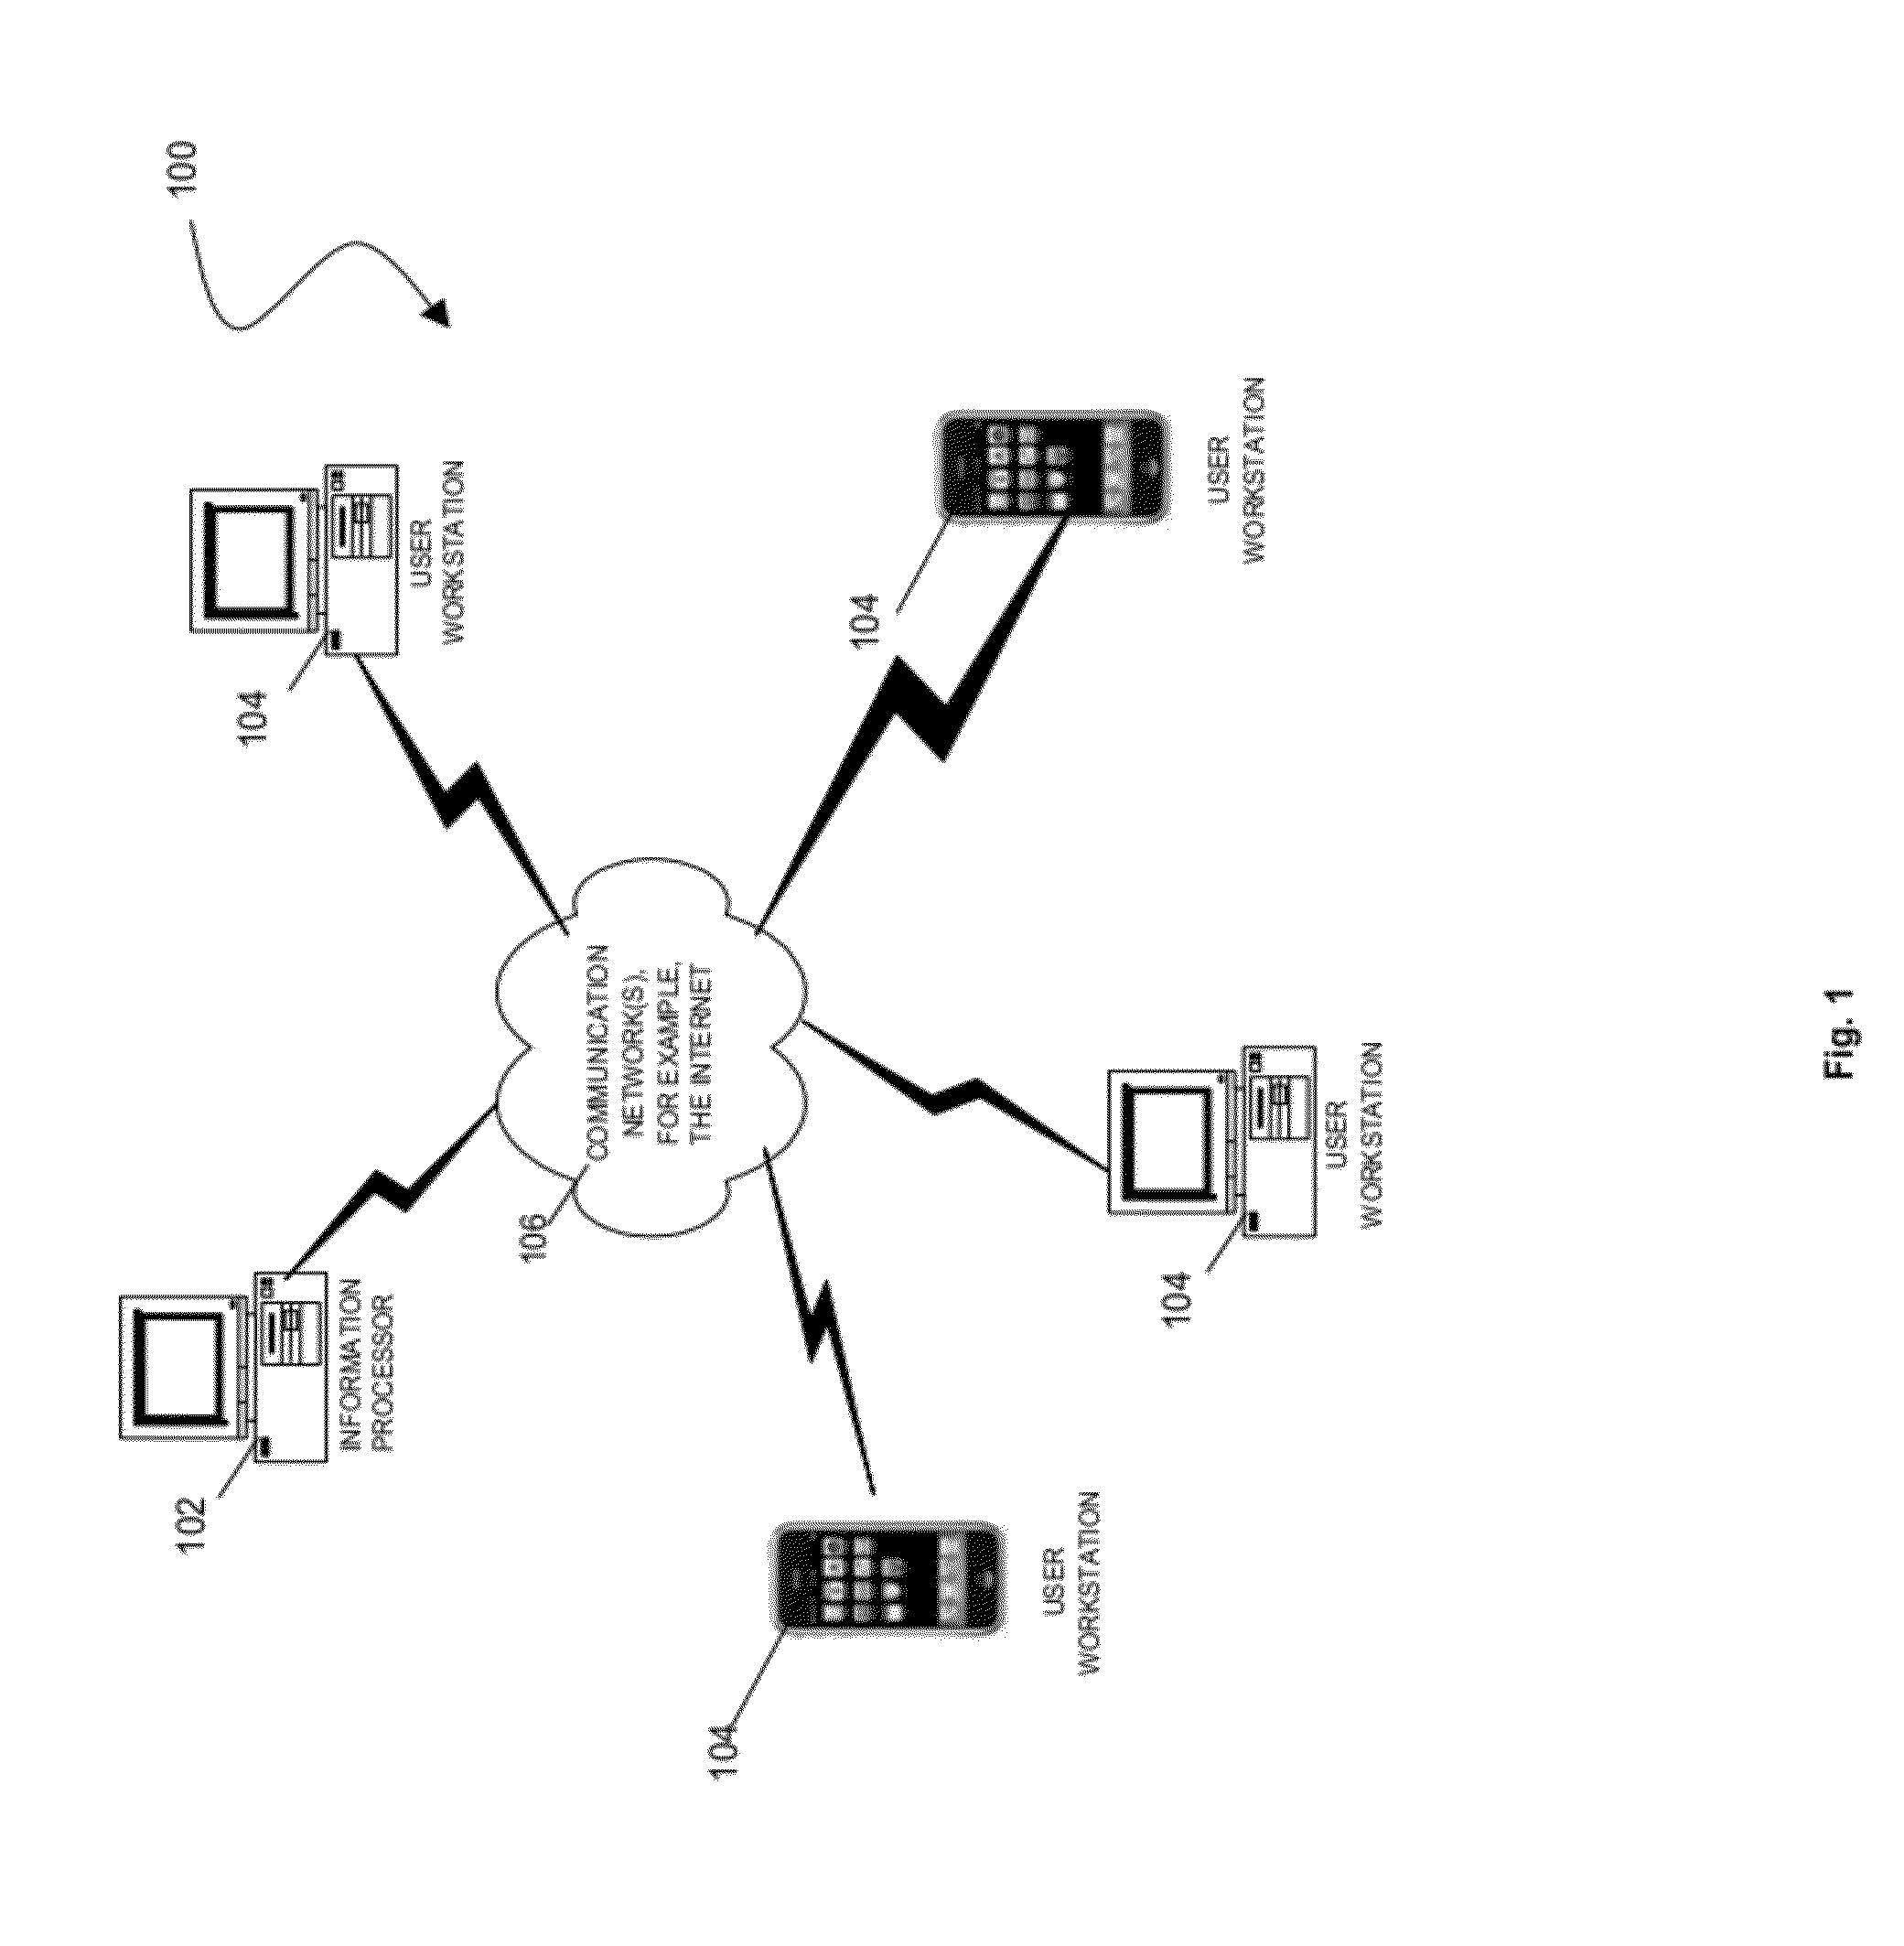 System and method for online communications management